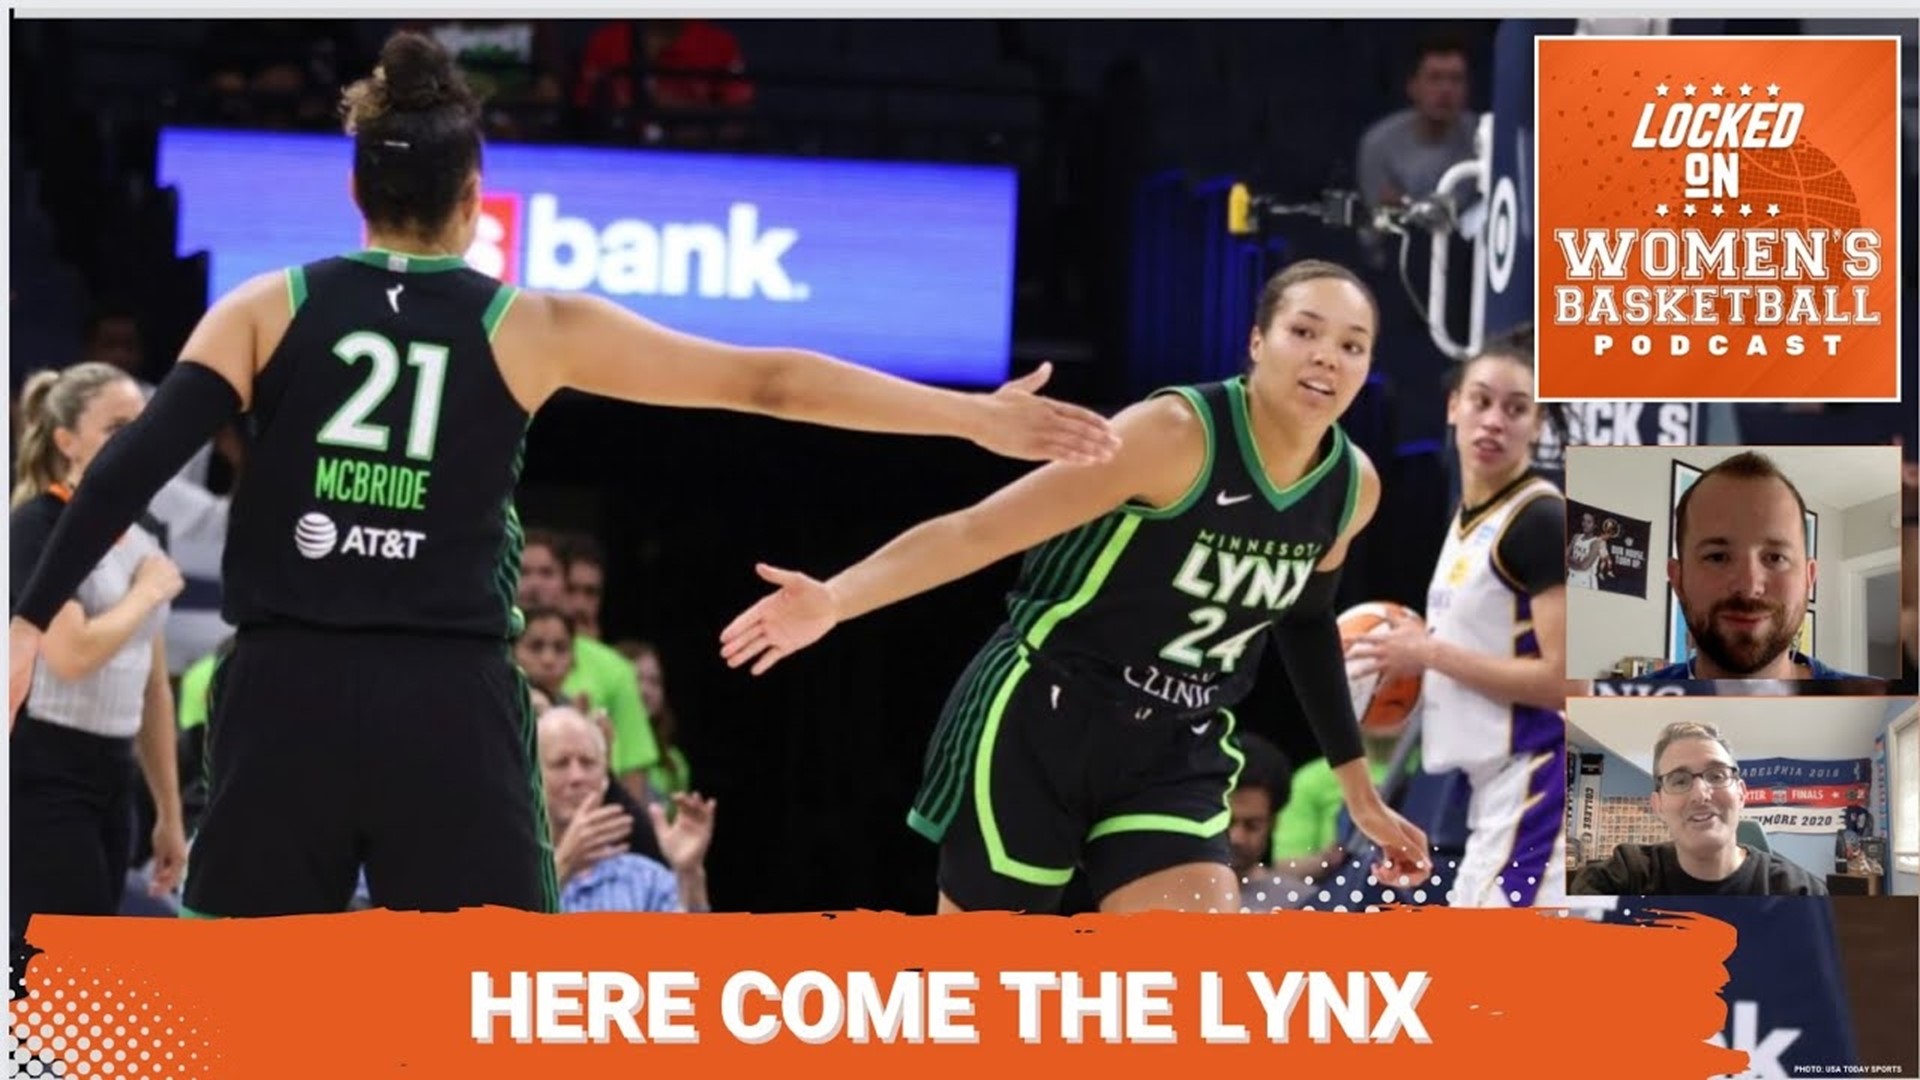 Save your Minnesota Lynx obits, please, as Napheesa Collier and Kayla McBride are scoring like no duo in team history